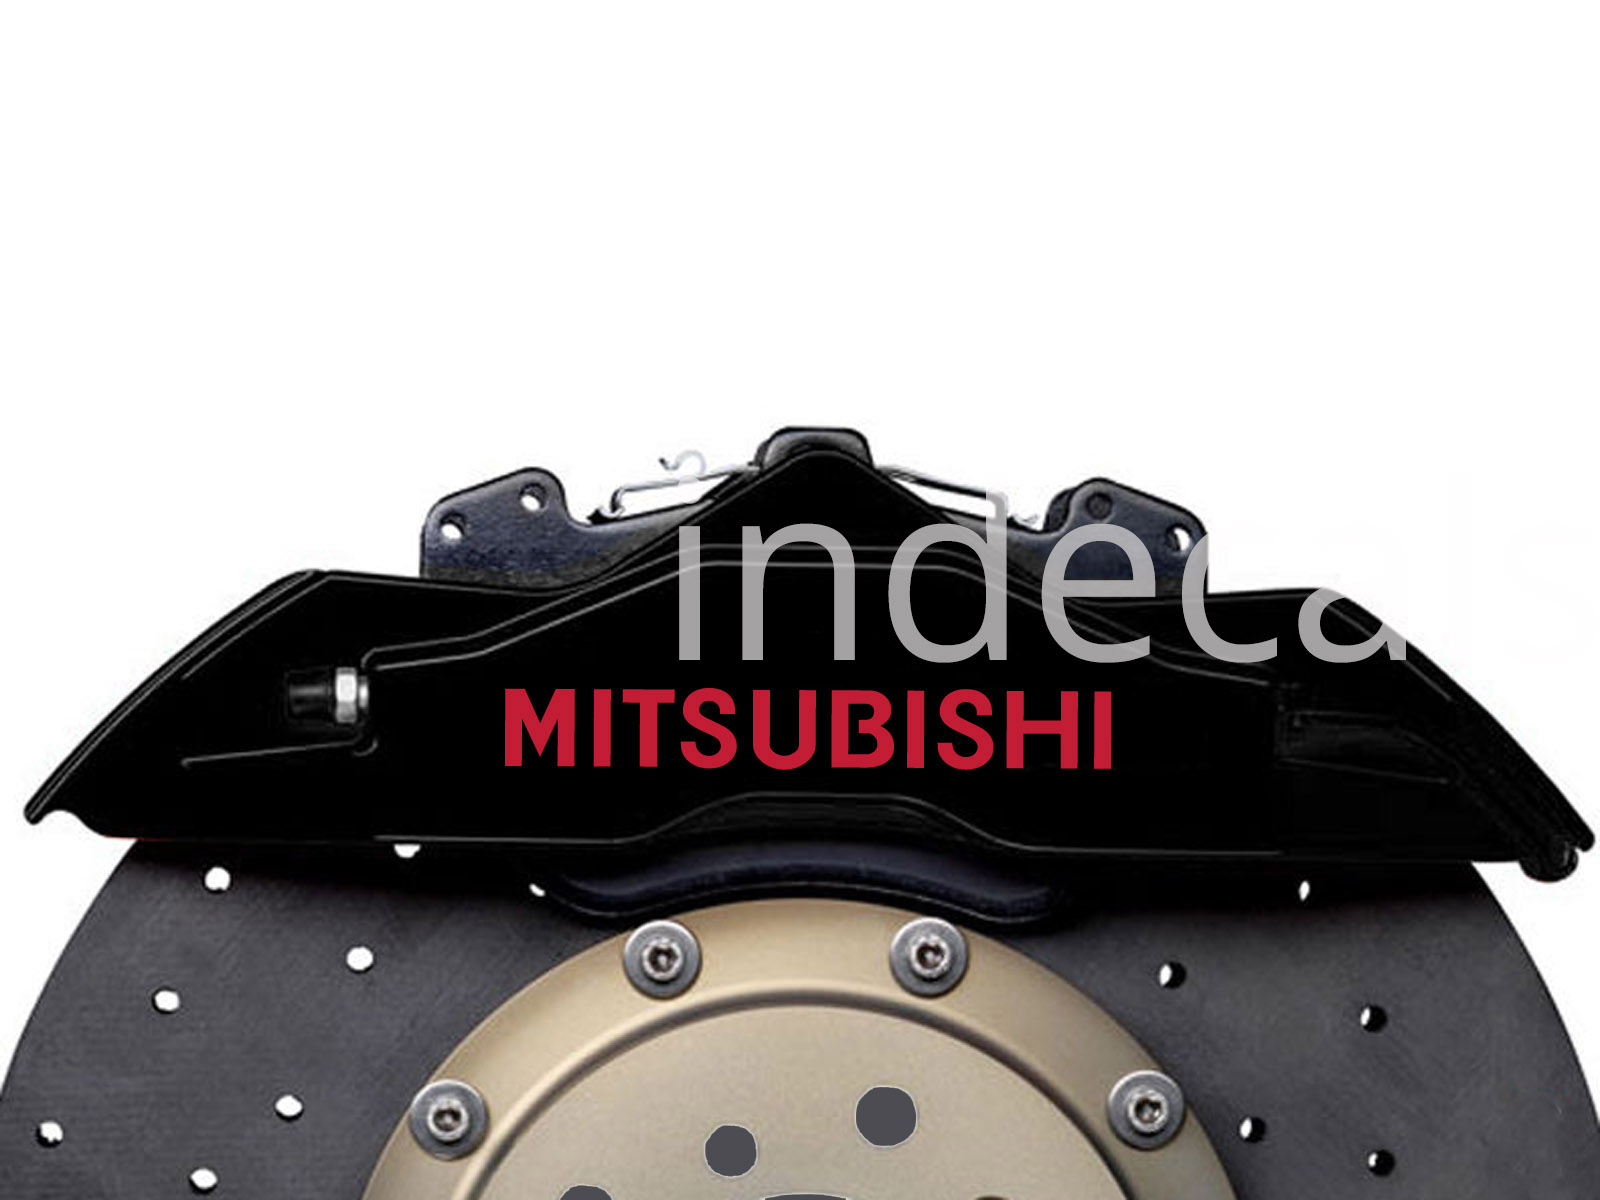 6 x Mitsubishi Stickers for Brakes - Red